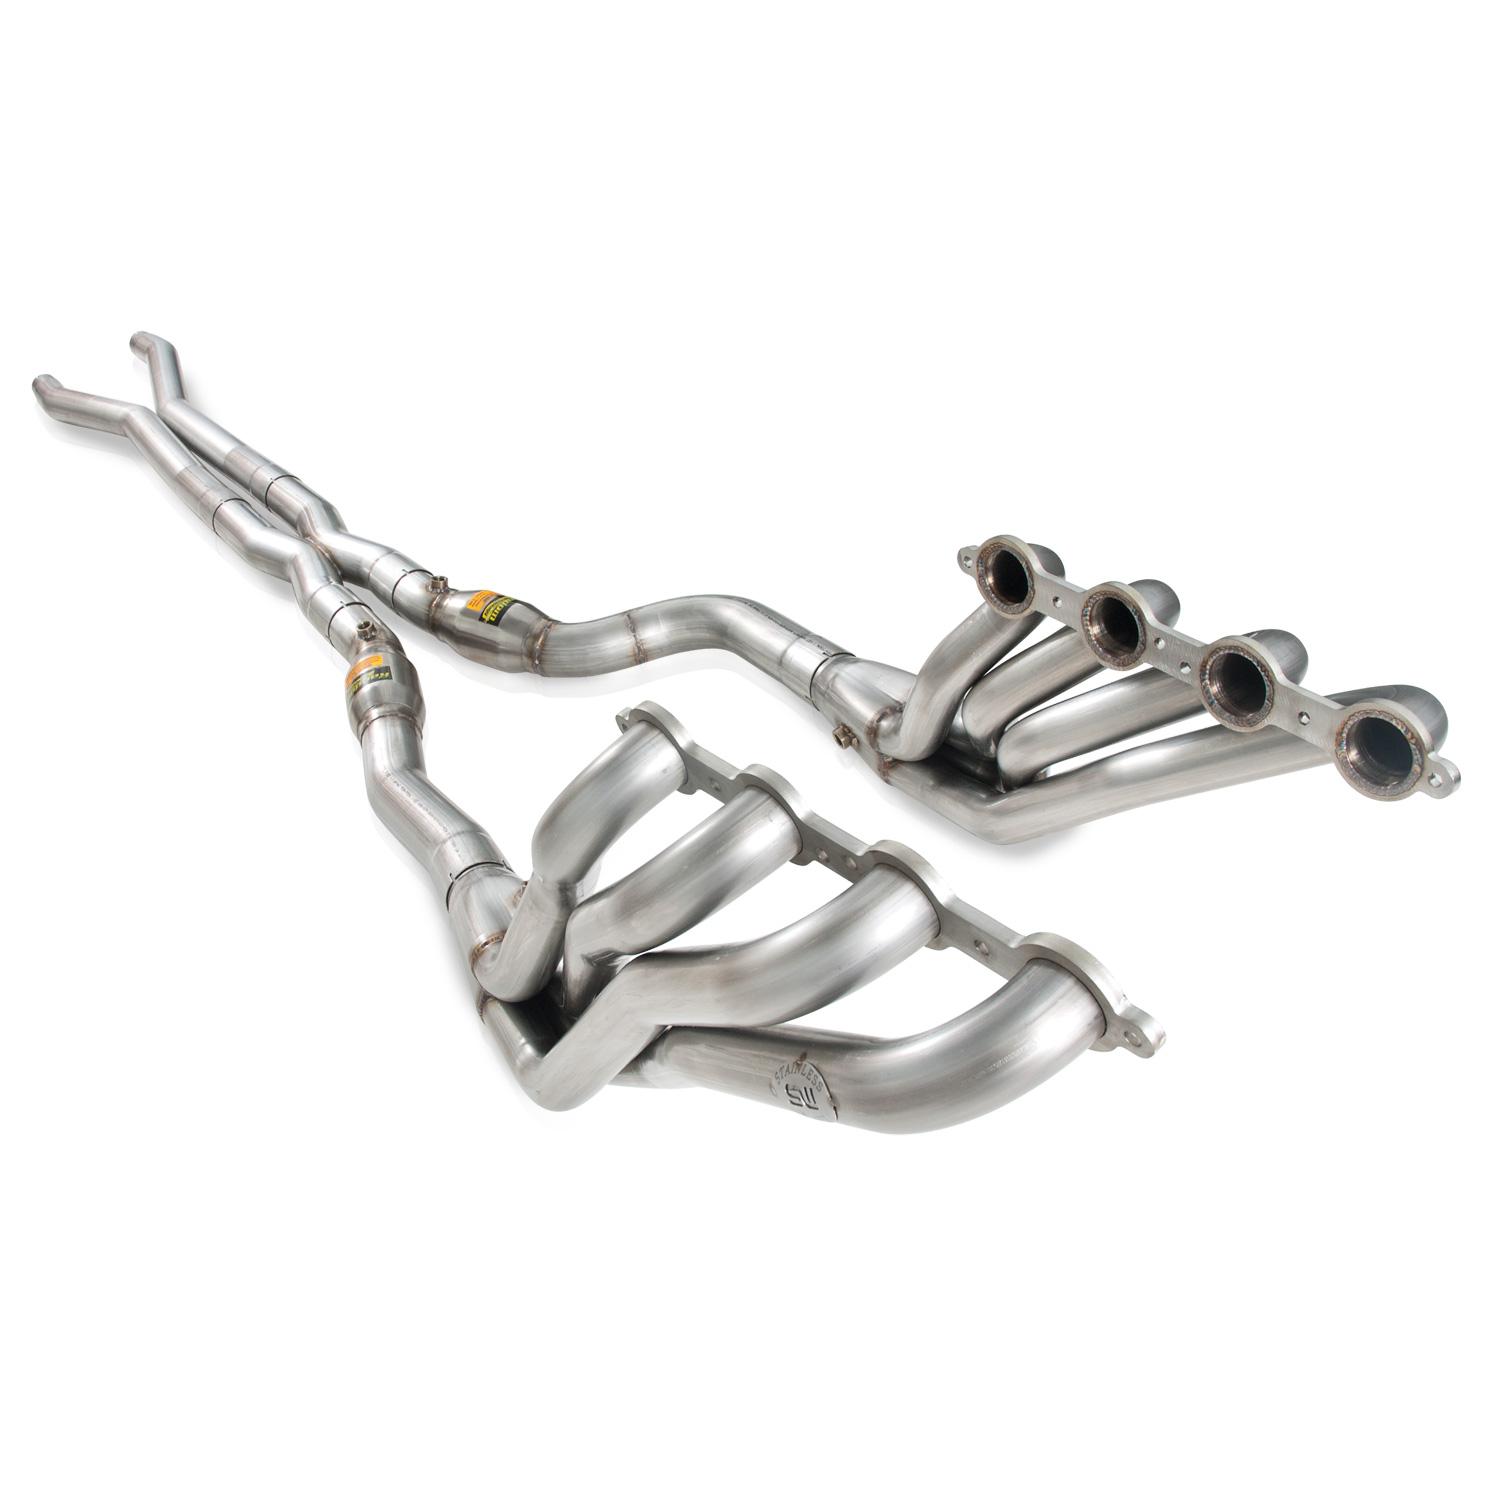 2009-2015 Cadillac CTS-V Stainless Works Long Tube Headers w/Catalytic Converters (For Factory Exhaust Connection)